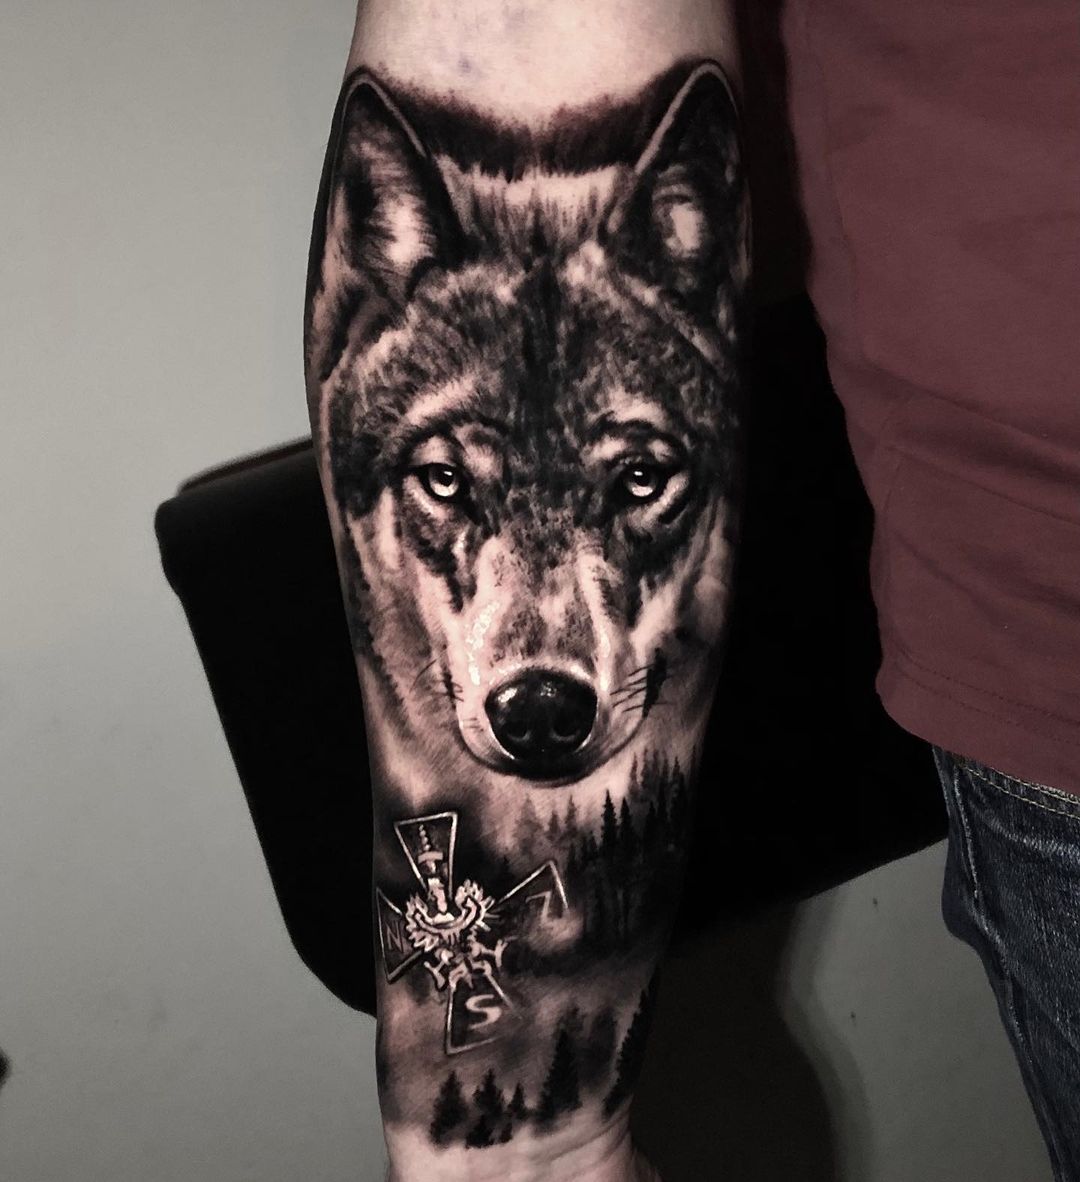 Viking Tattoo Inspired With Black Wolf Image Over Forearm 